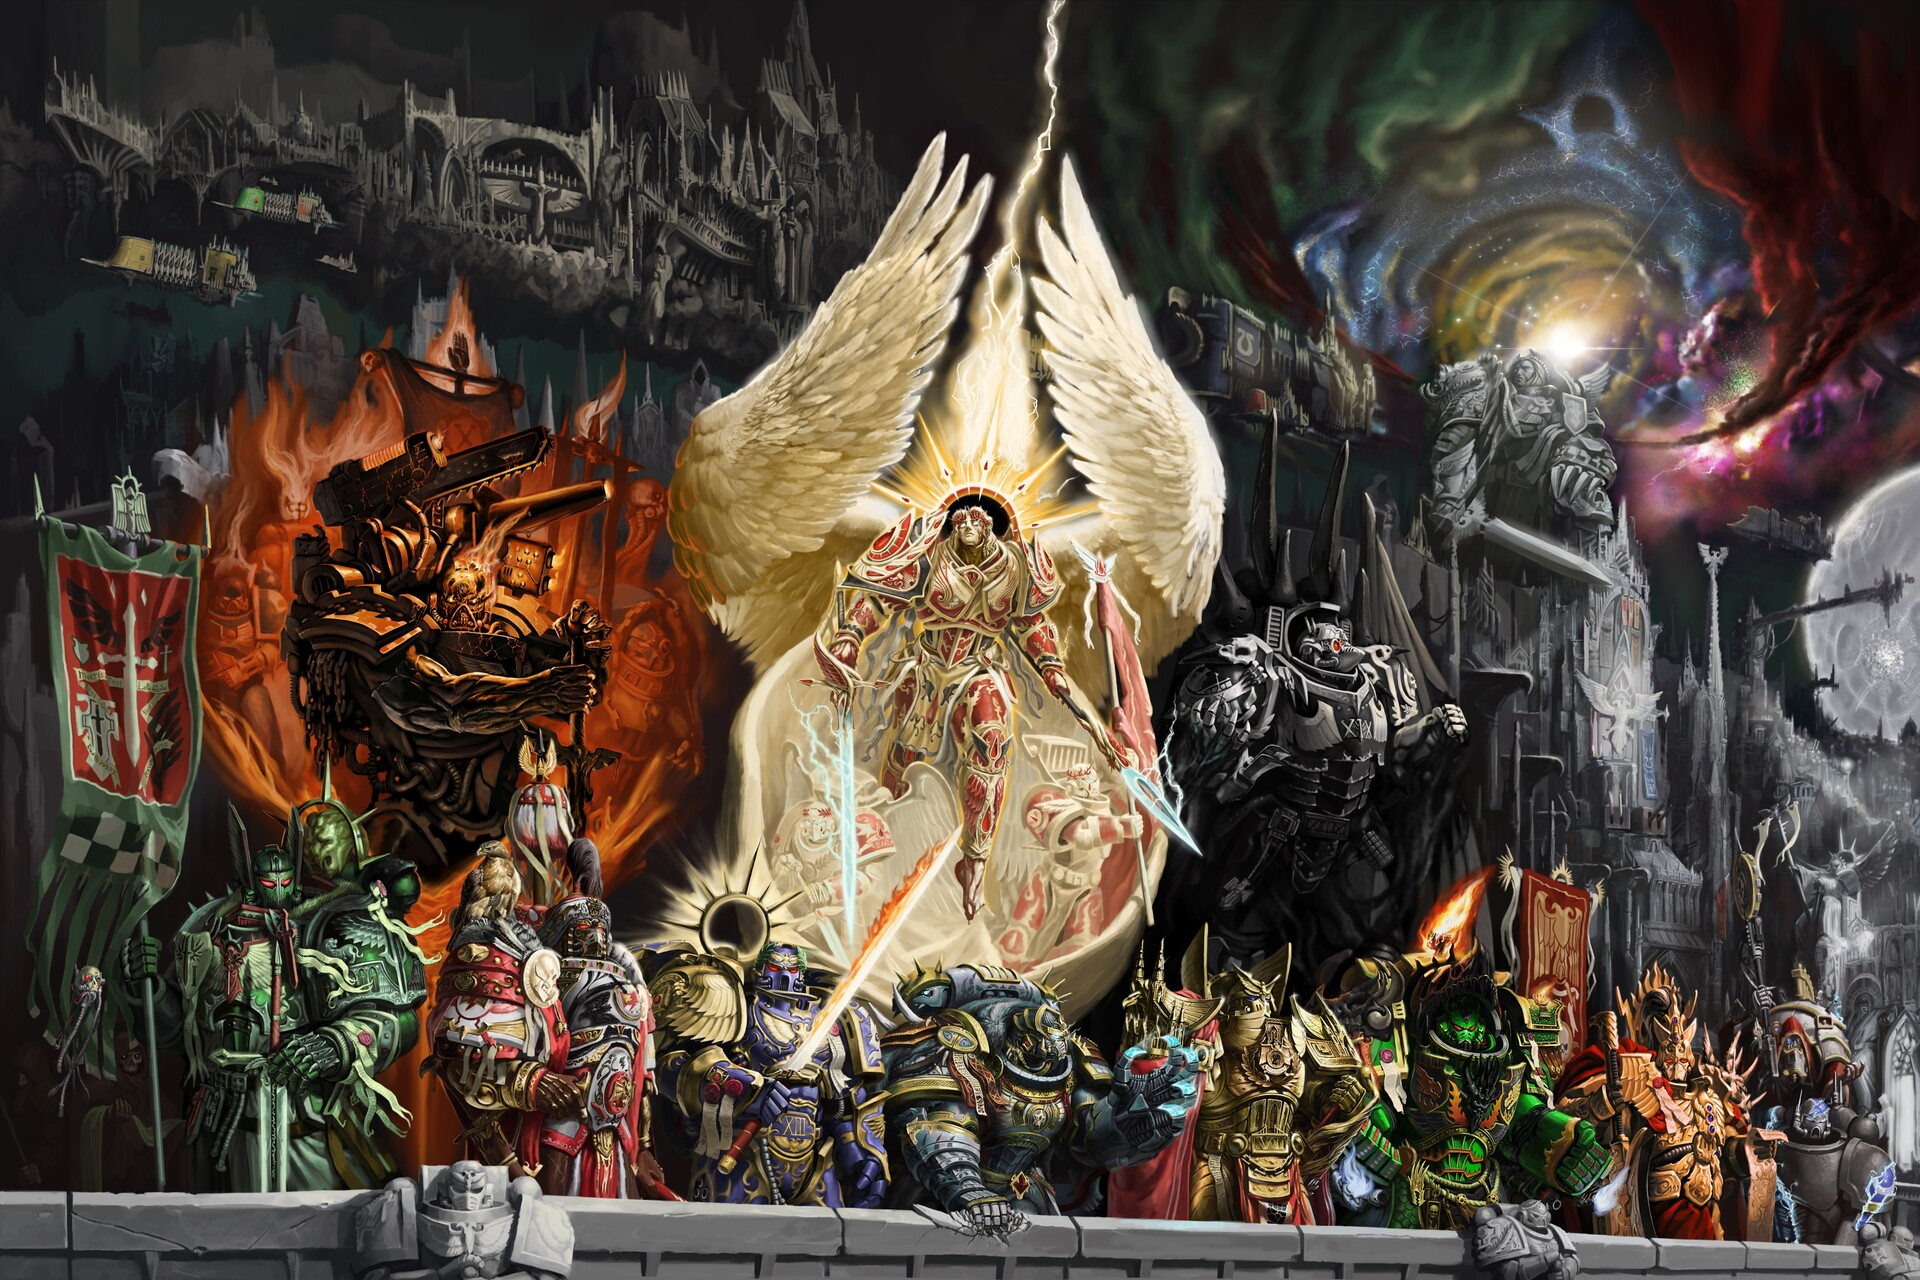 General 1920x1280 Warhammer 40,000 Warhammer science fiction high tech Warhammer 30,000 painting Imperium of Man primarchs perturabo vulcan Ferrus Manus Robute Gilliman Lion El Johnston Rogal Dorn corvus corax sanguinius Lemann russ Jaghatai Khan Beyreuth Alpharius and Omegon Emperor of Mankind Cawl Holy Terra Earth video games video game art video game characters